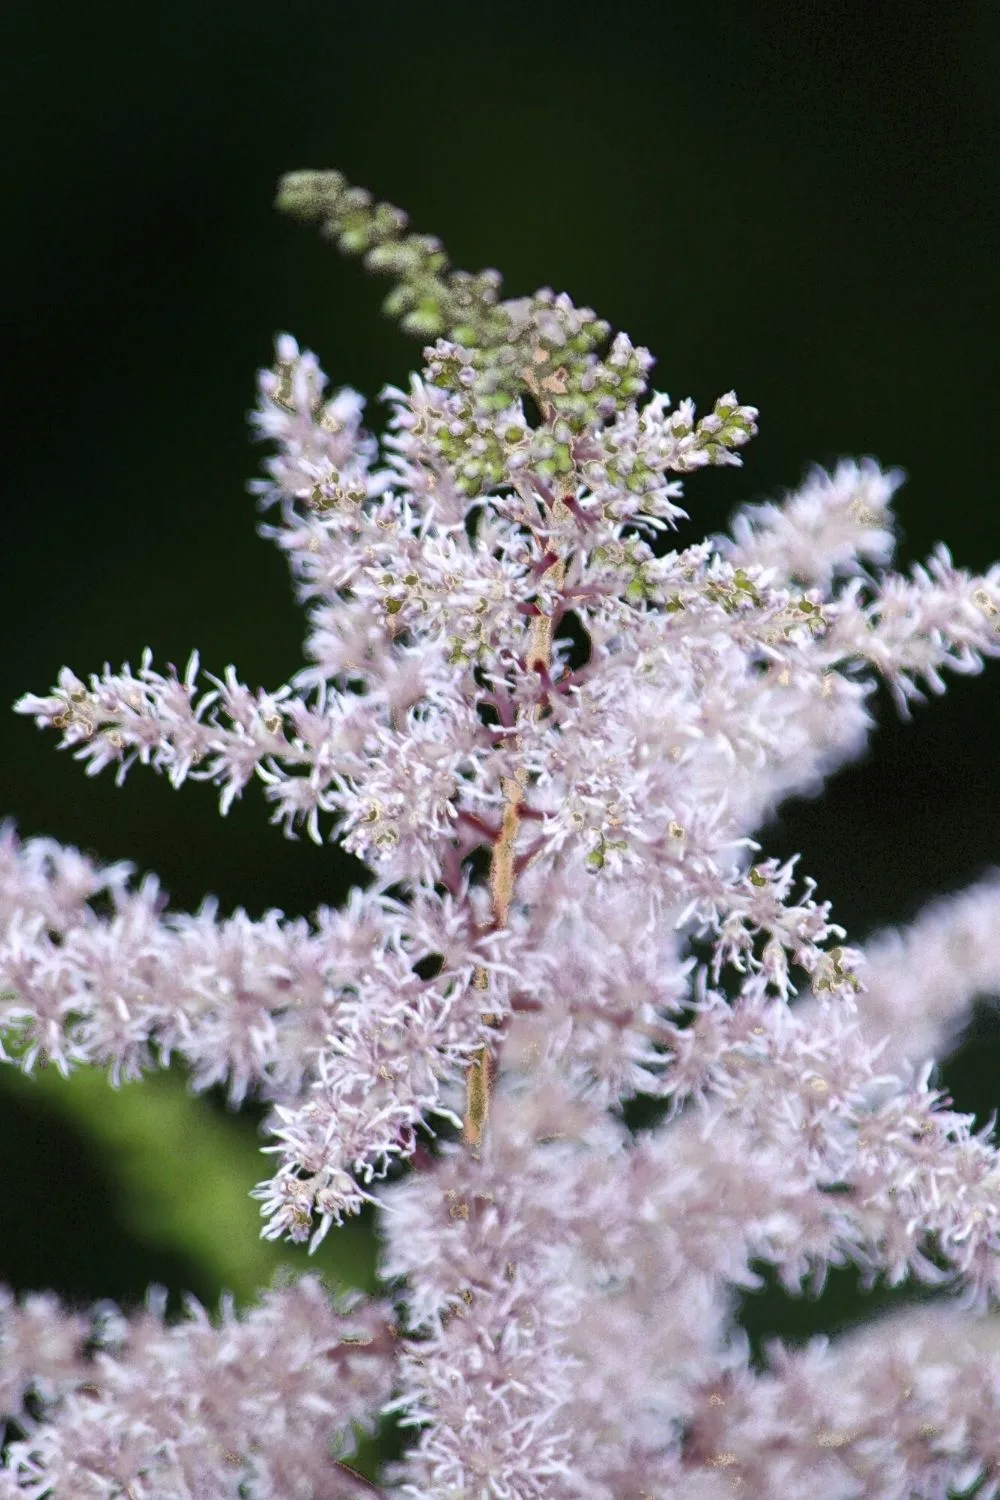 Astilbe, aka False Goat's Beard, thrive in the few sun rays that the east-facing side of the house provides